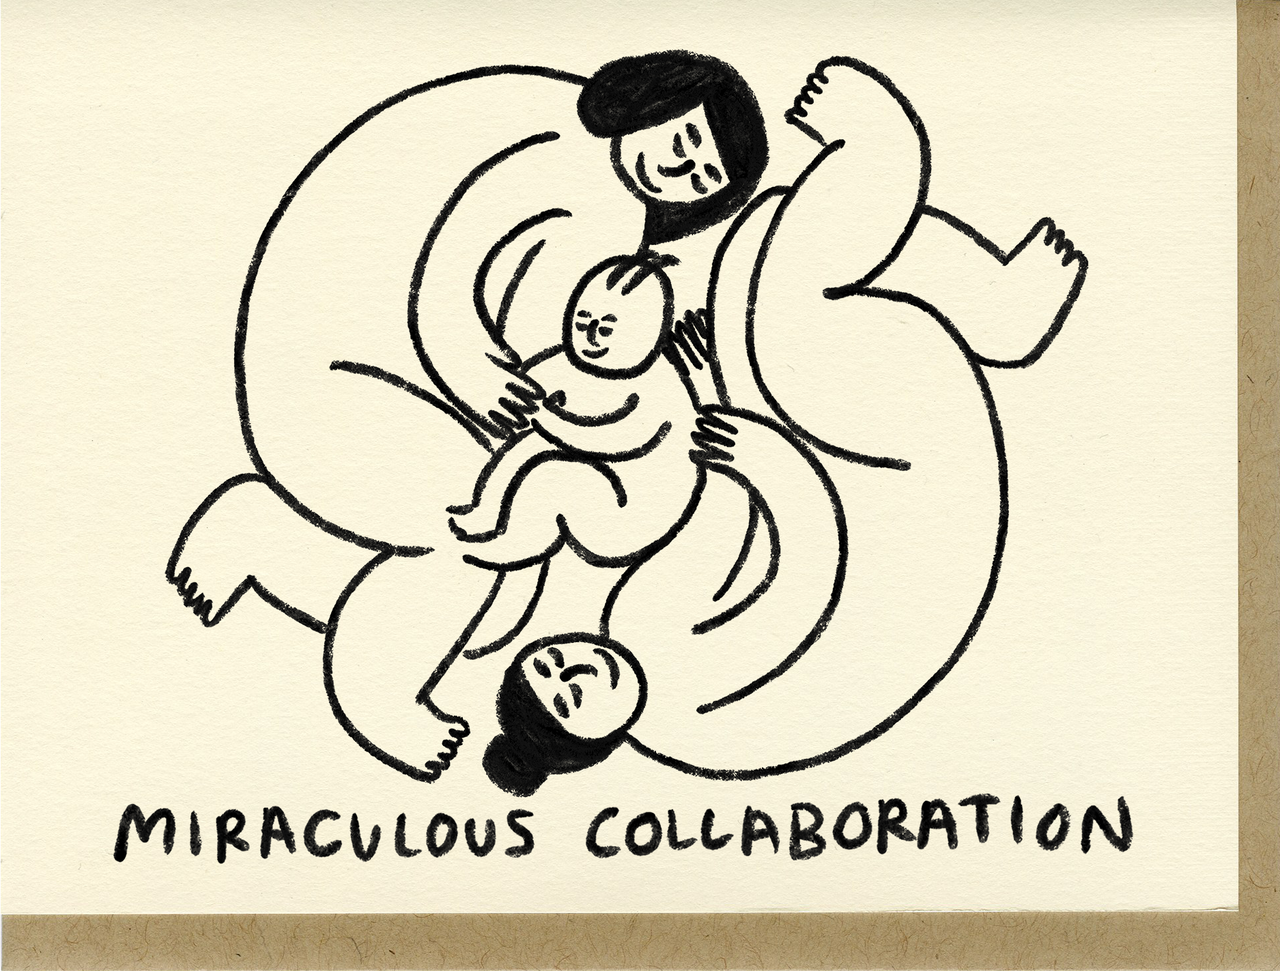 Miraculous Collaboration